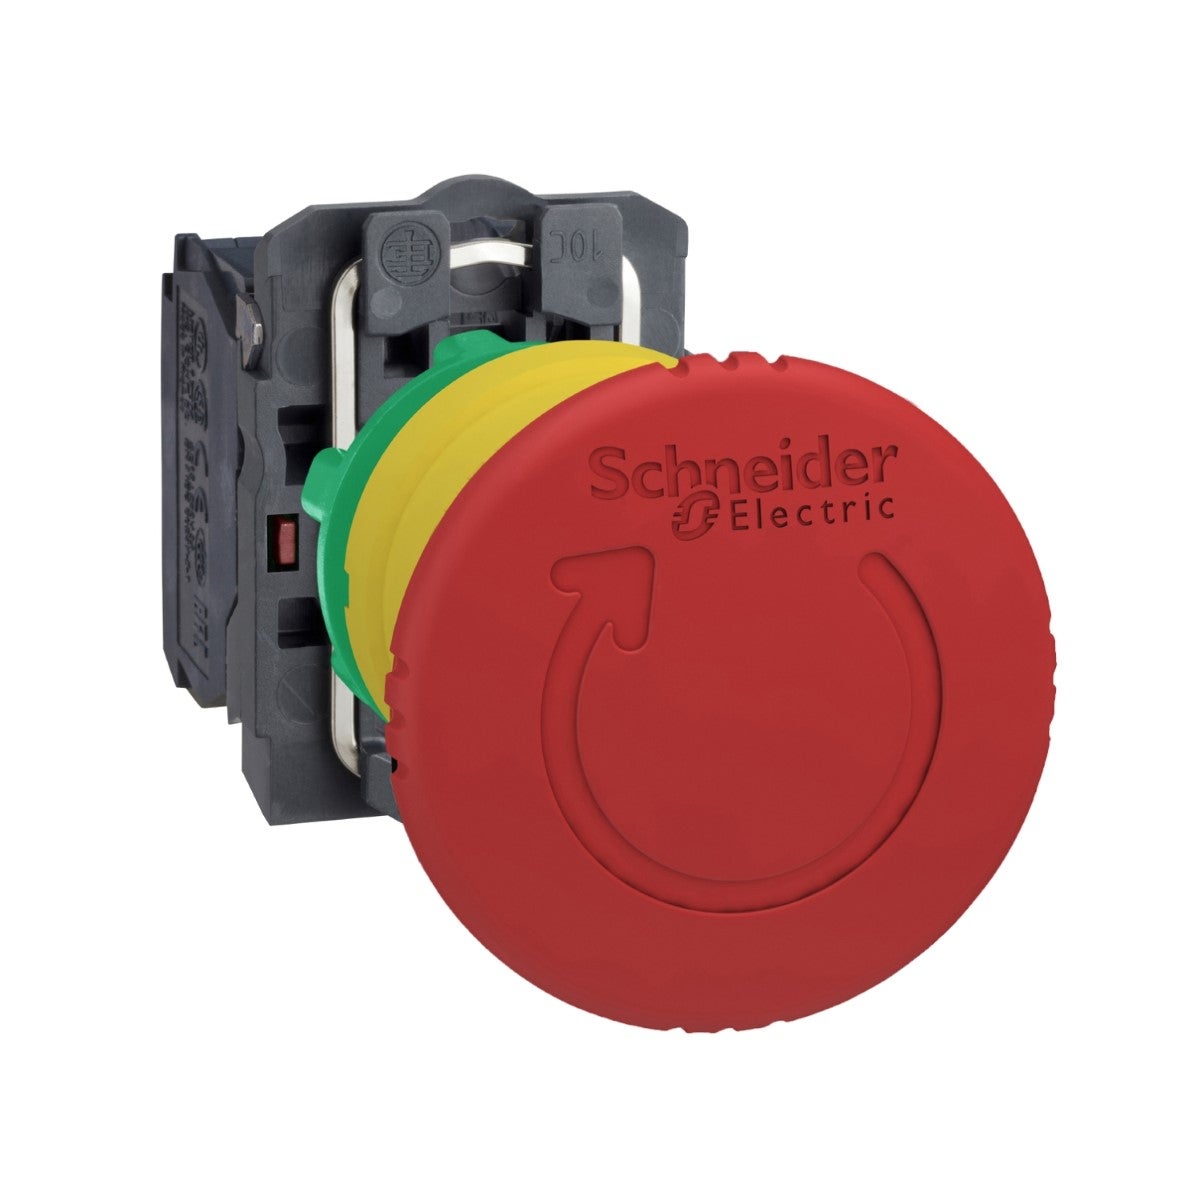 Schneider Electric Harmony XB5 - red Ã˜40 Emergency stop, switching off Ã˜22 trigger latching turn release 1NO+1NC